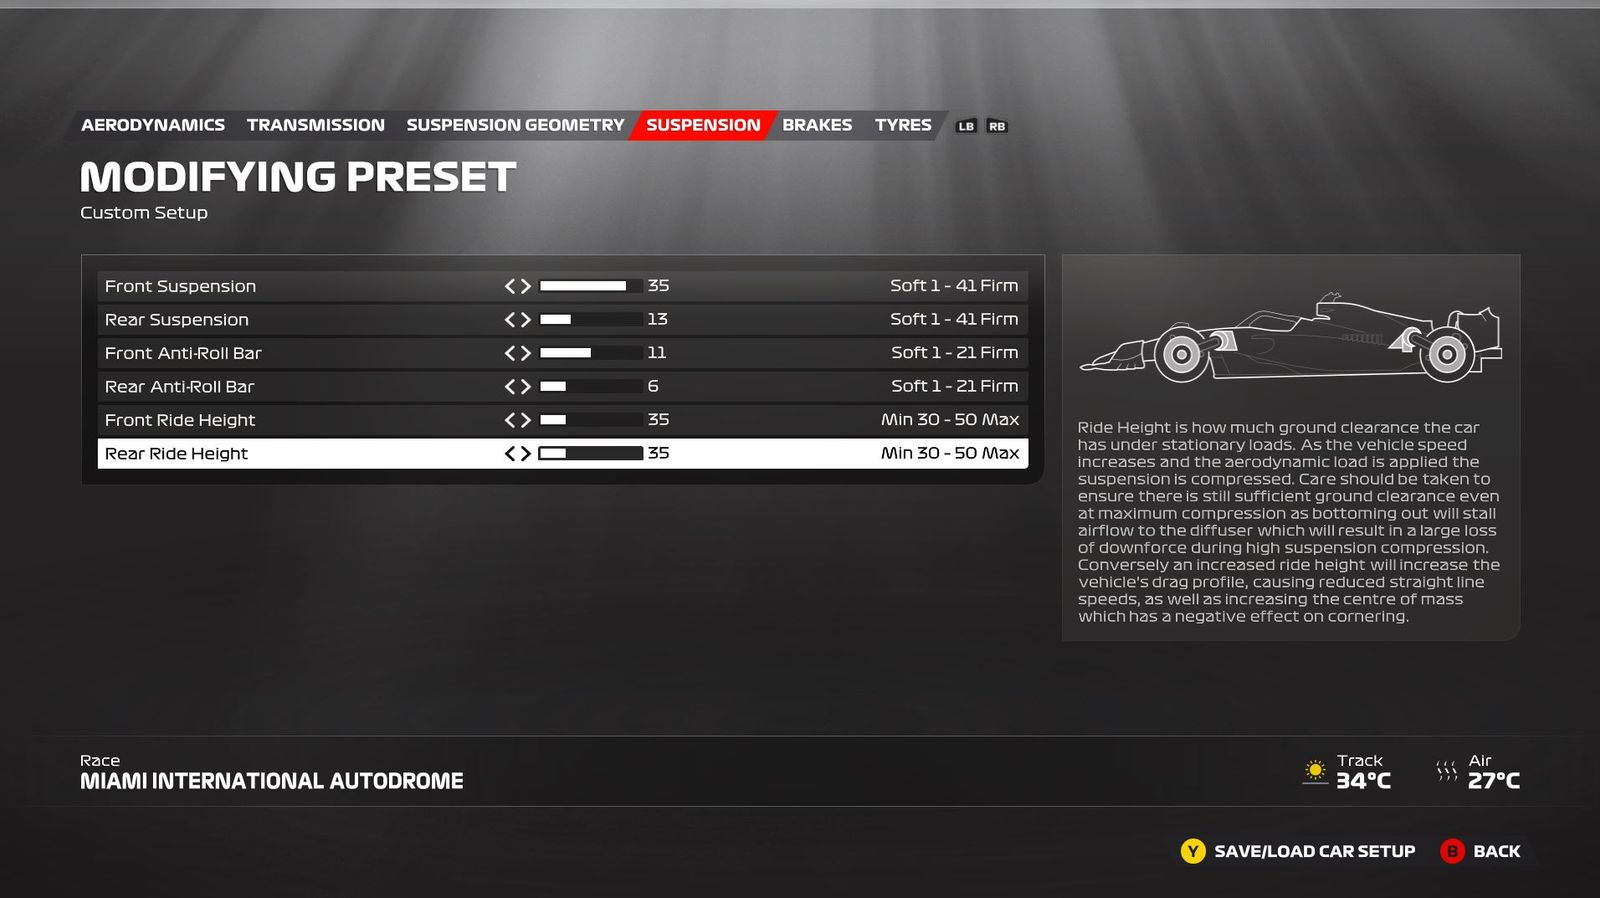 F1 23 Miami setup suspension screen showing the ideal settings